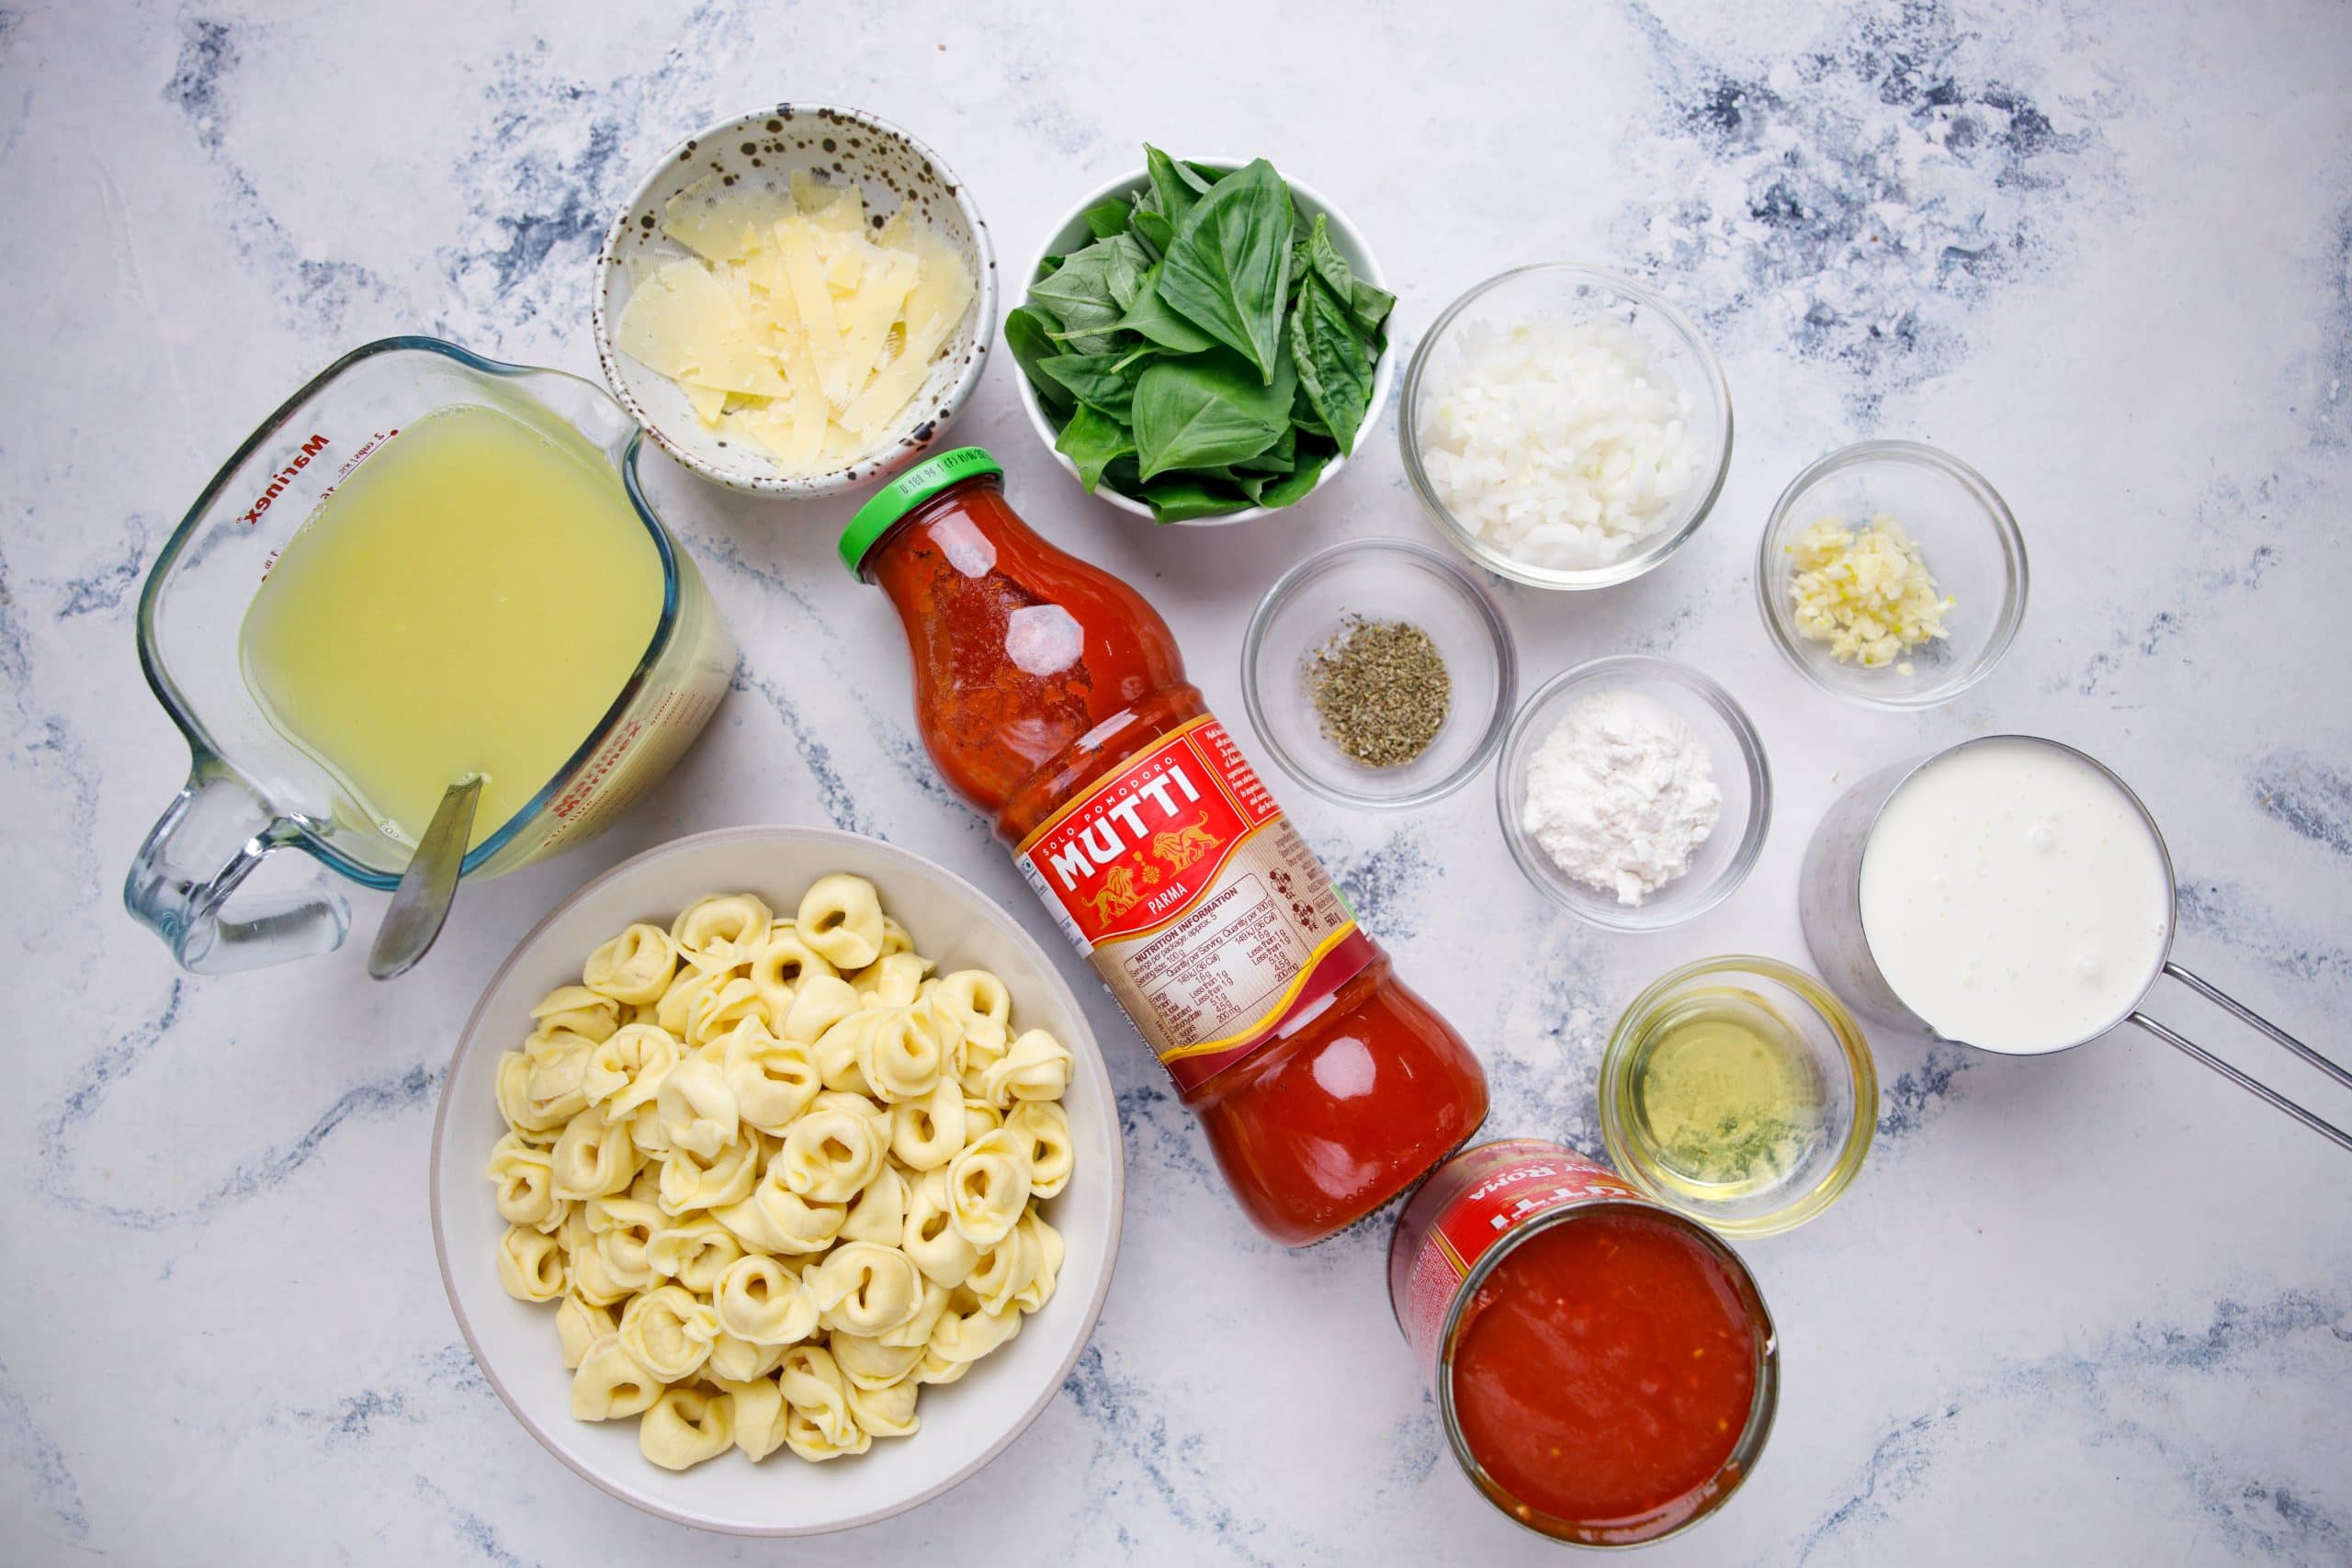 Ingreddients required for tomato tortellini soup - tortellini pasta, chicken stock, cheese, tomato diced and puree, basil, olive oil